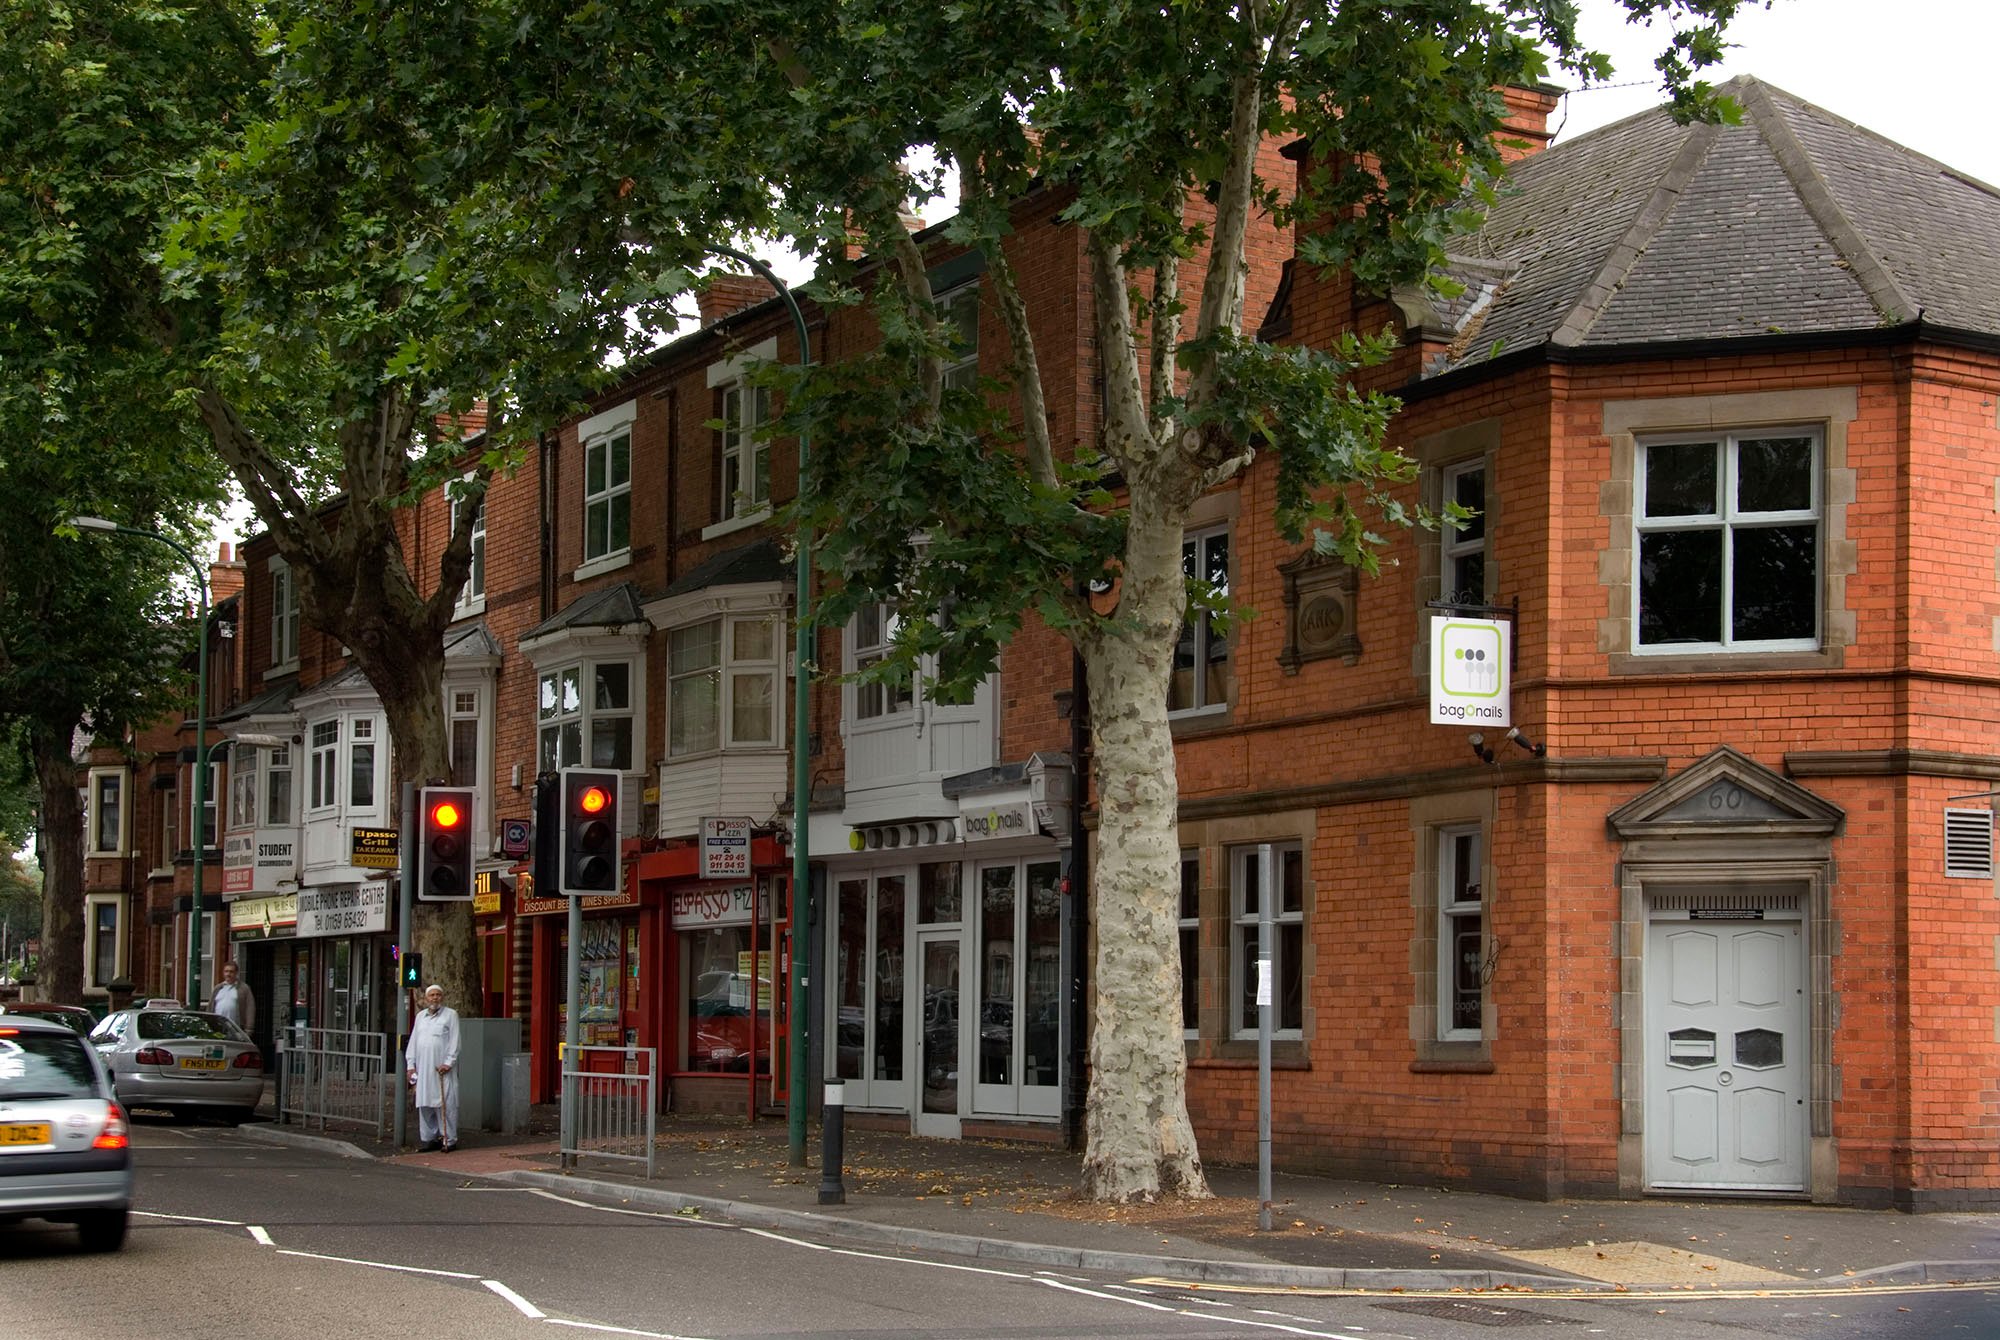 Road with a row of red brick buildings to the right. The pavement is lined by tall trees. A man wearing white is standing by the traffic lights.